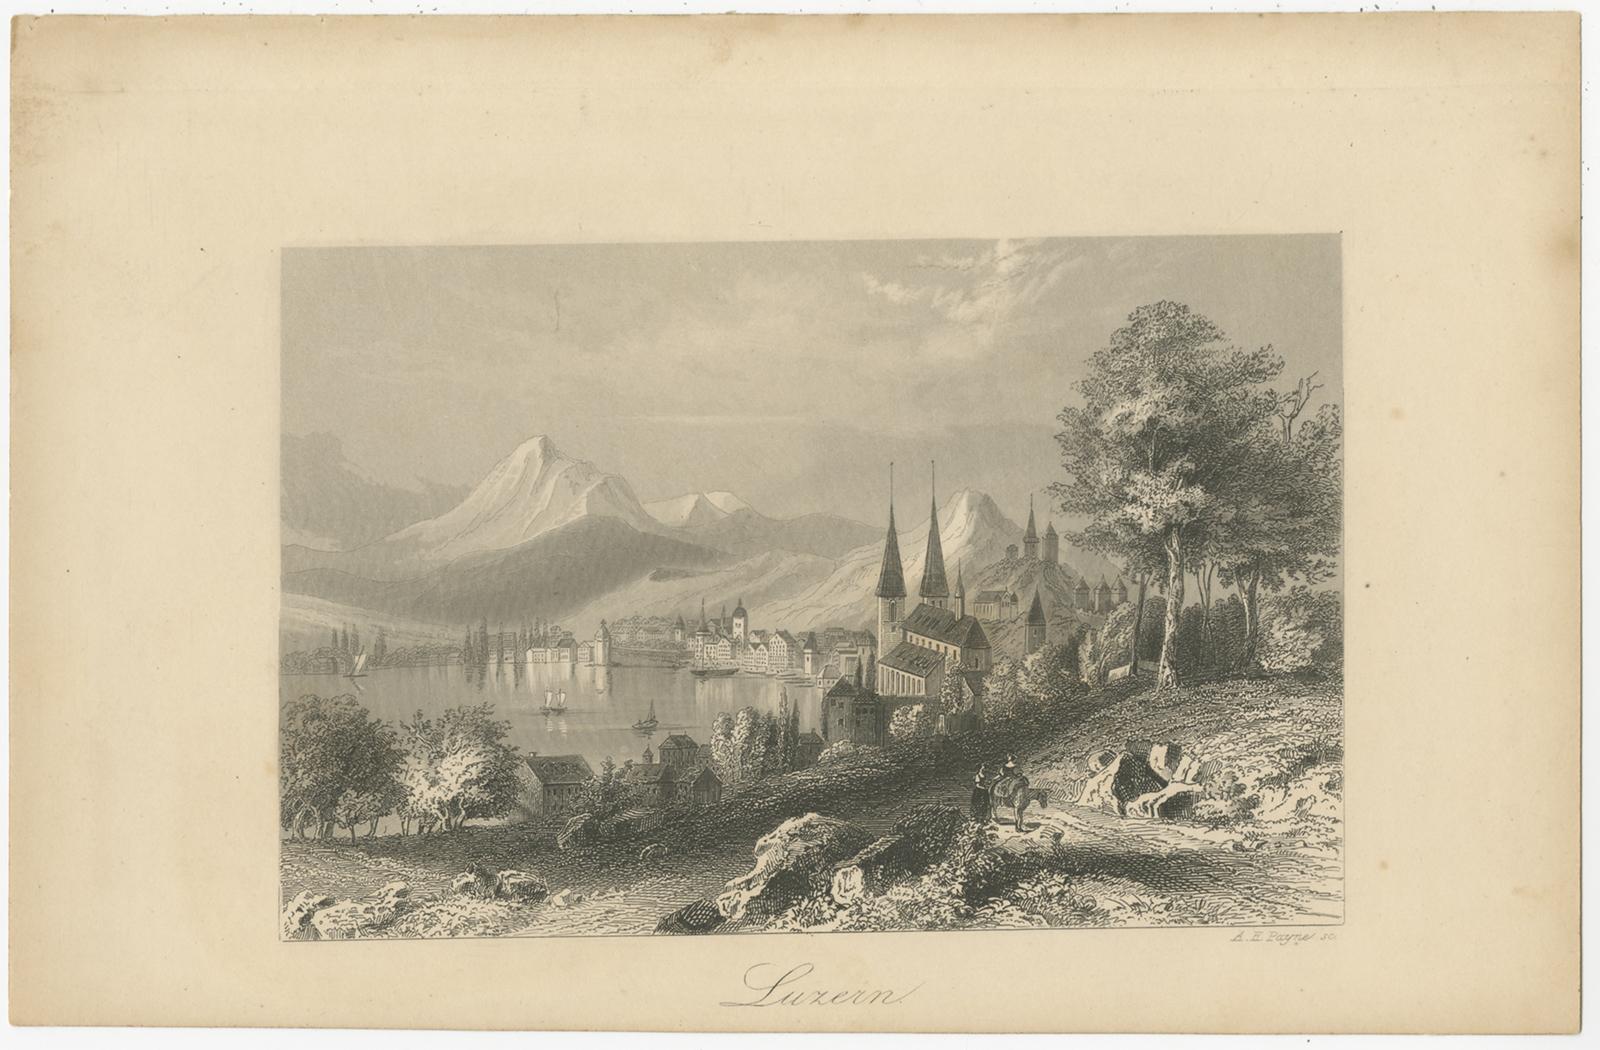 Antique print titled 'Luzern'. View of the city of Lucerne or Luzern, Switzerland. Engraved by A.H. Payne, published circa 1850.